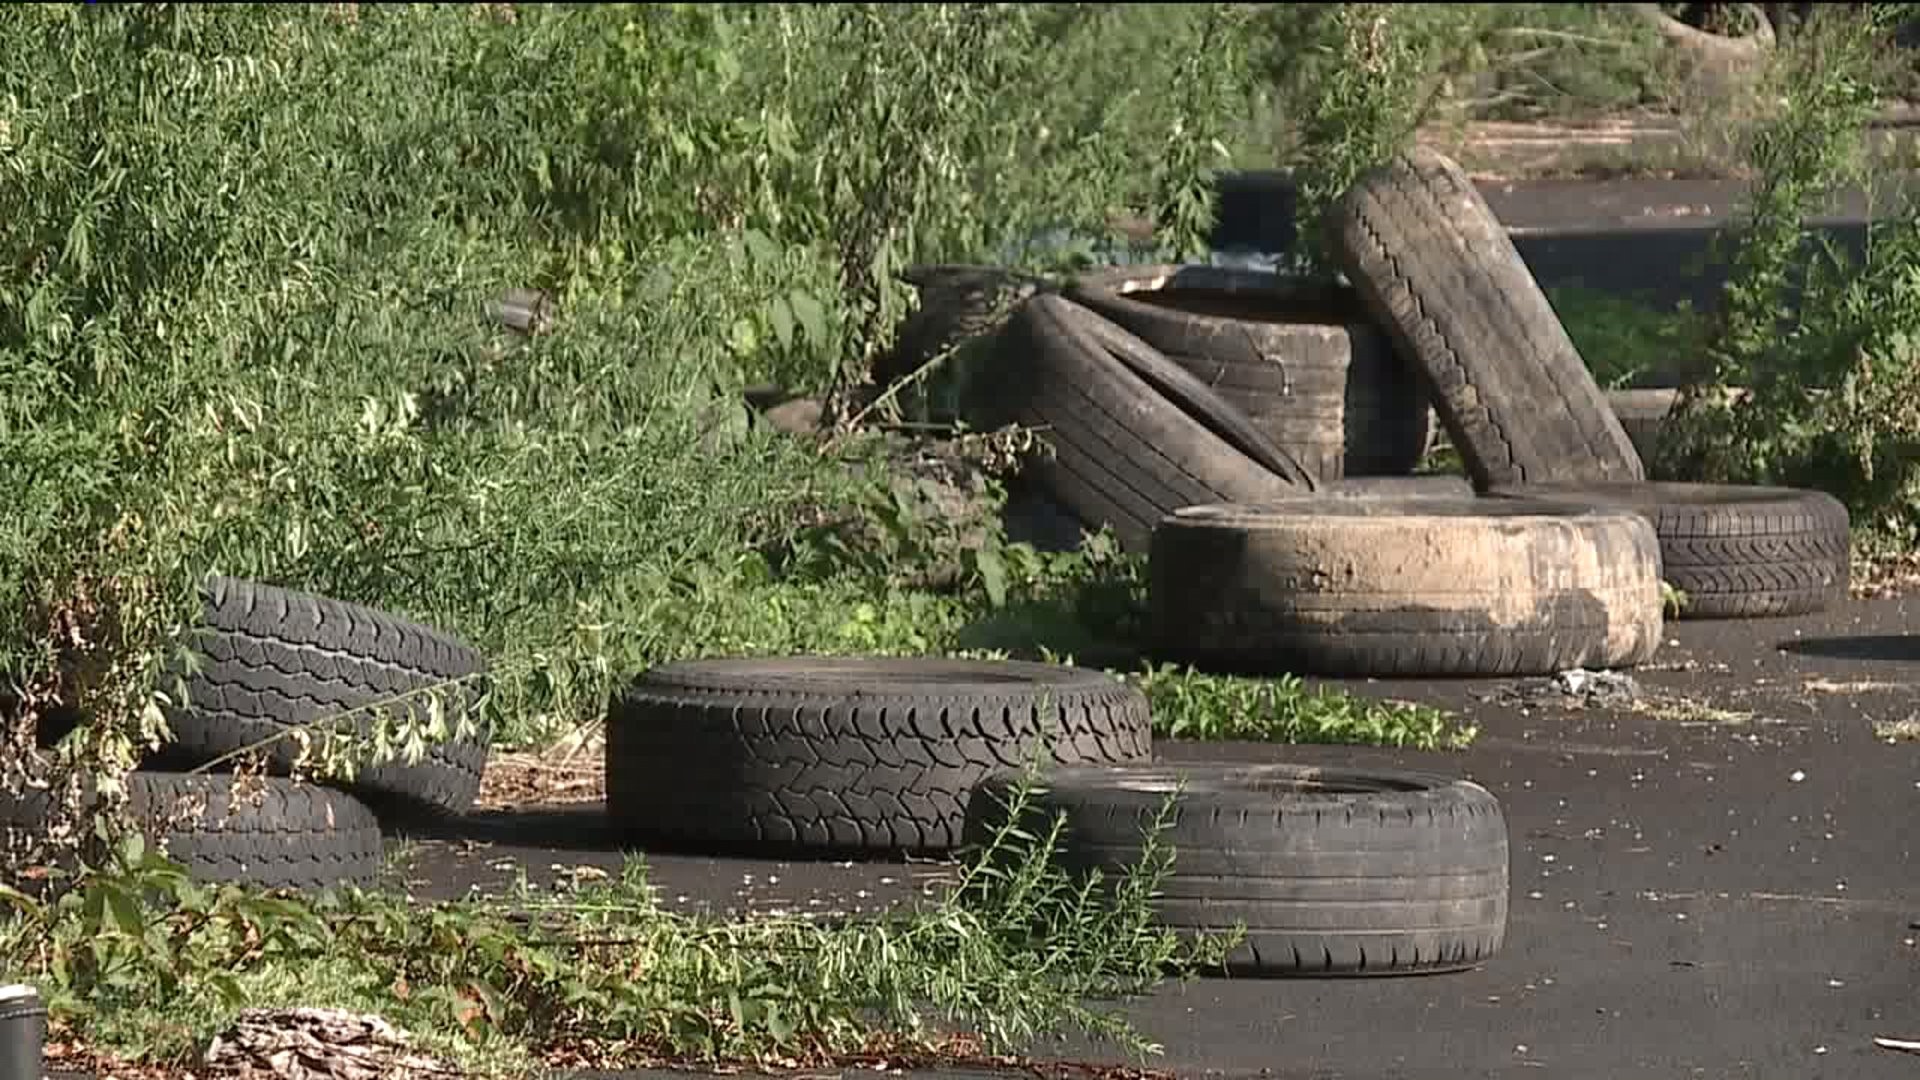 Woman, Two Teens Charged with Dumping Tires in Schuylkill County